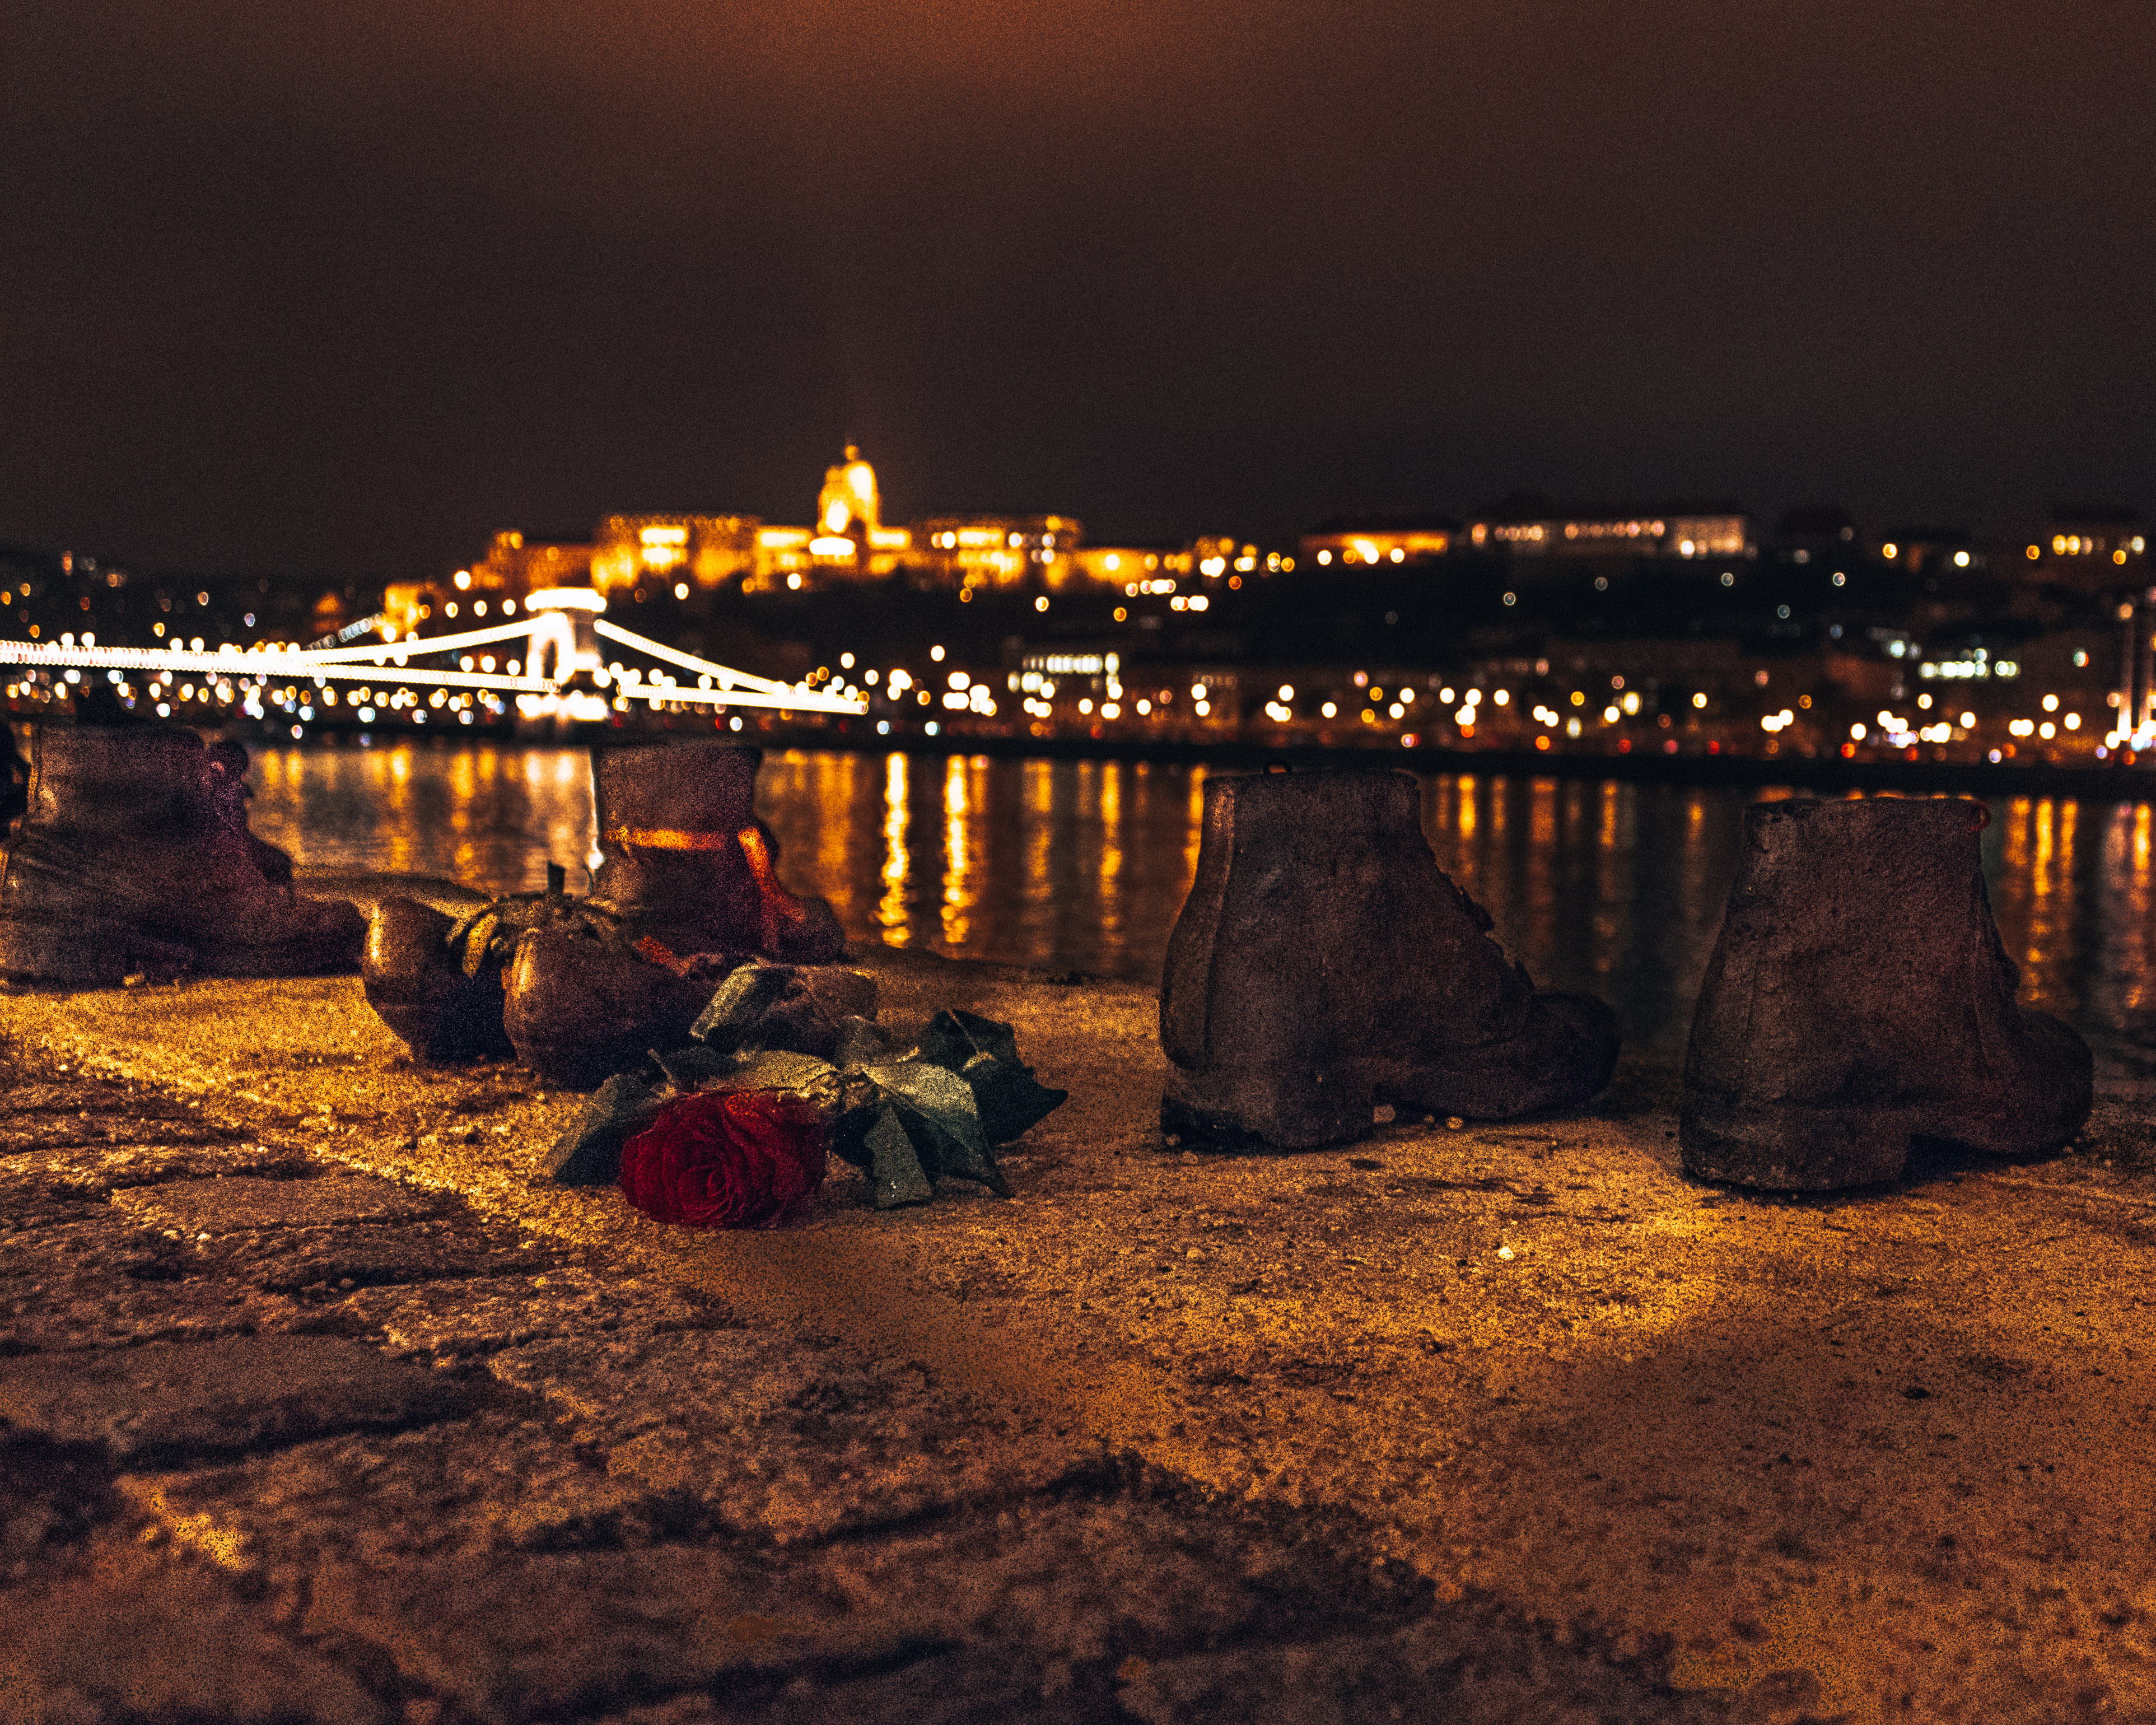 The famous Shoes on the Danube river at night in Budapest, Hungary